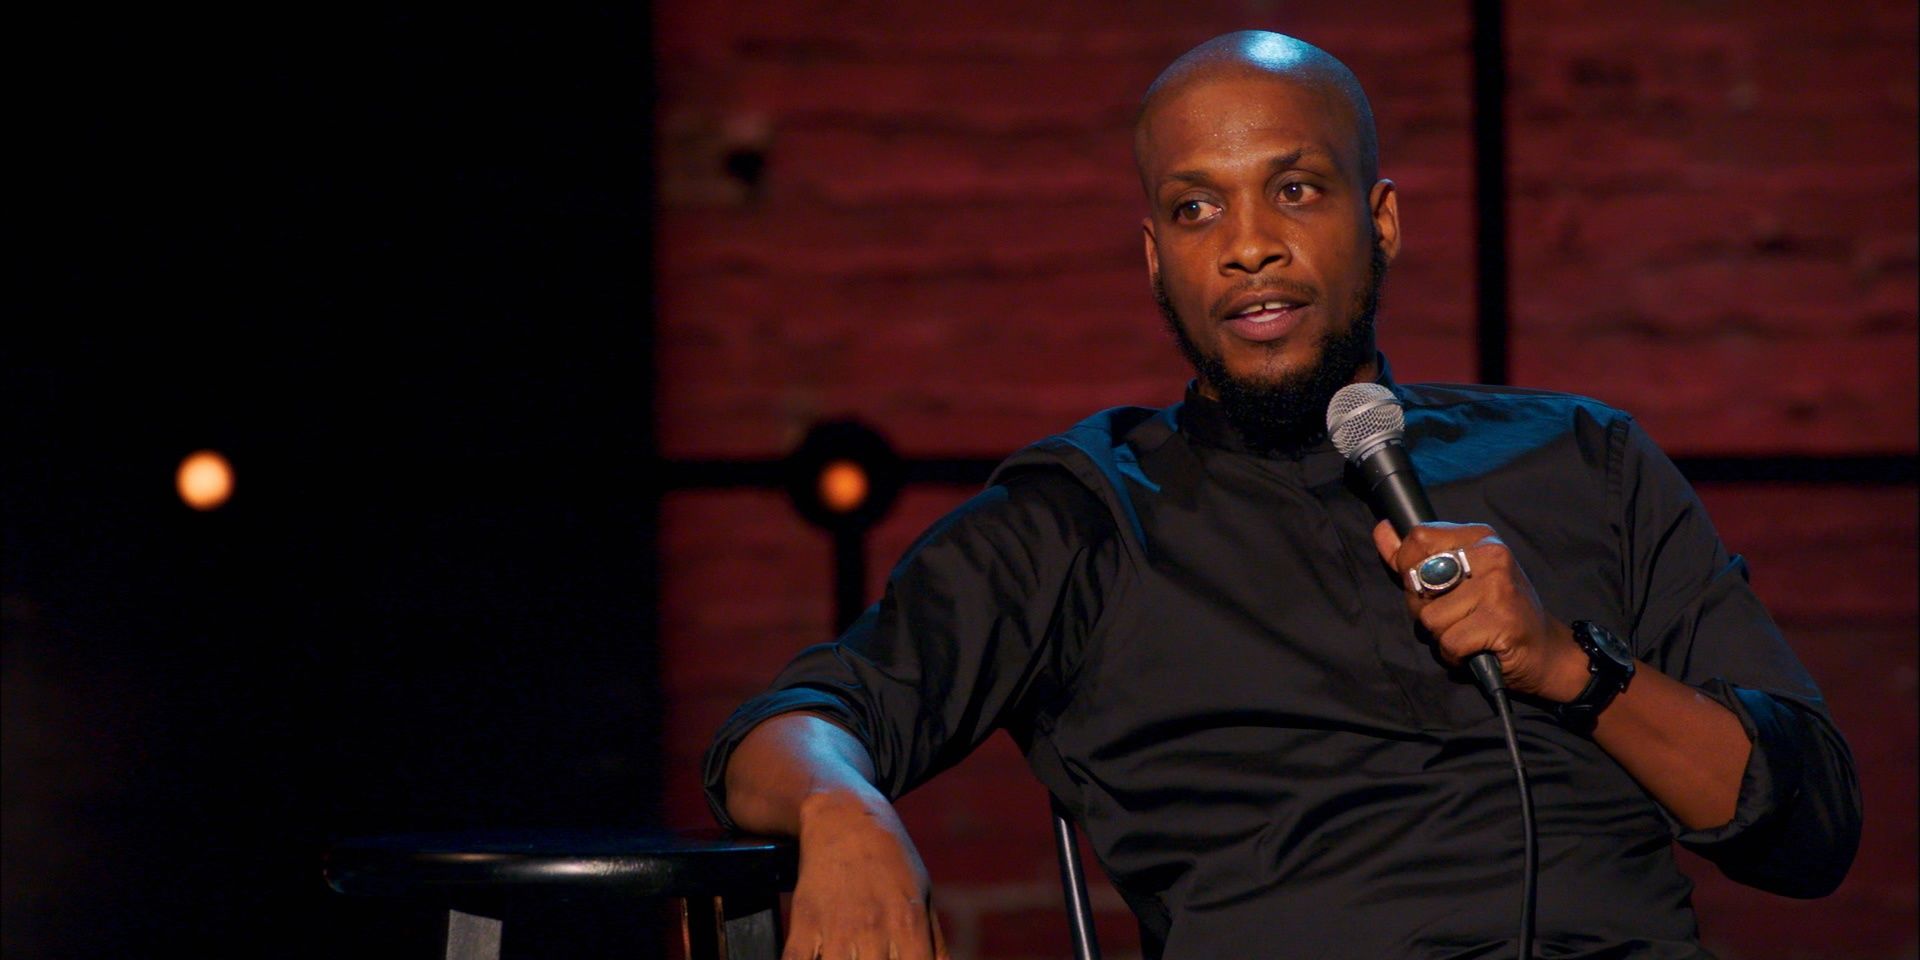 Texas comedian Ali Siddiq during his Comedy Central special show